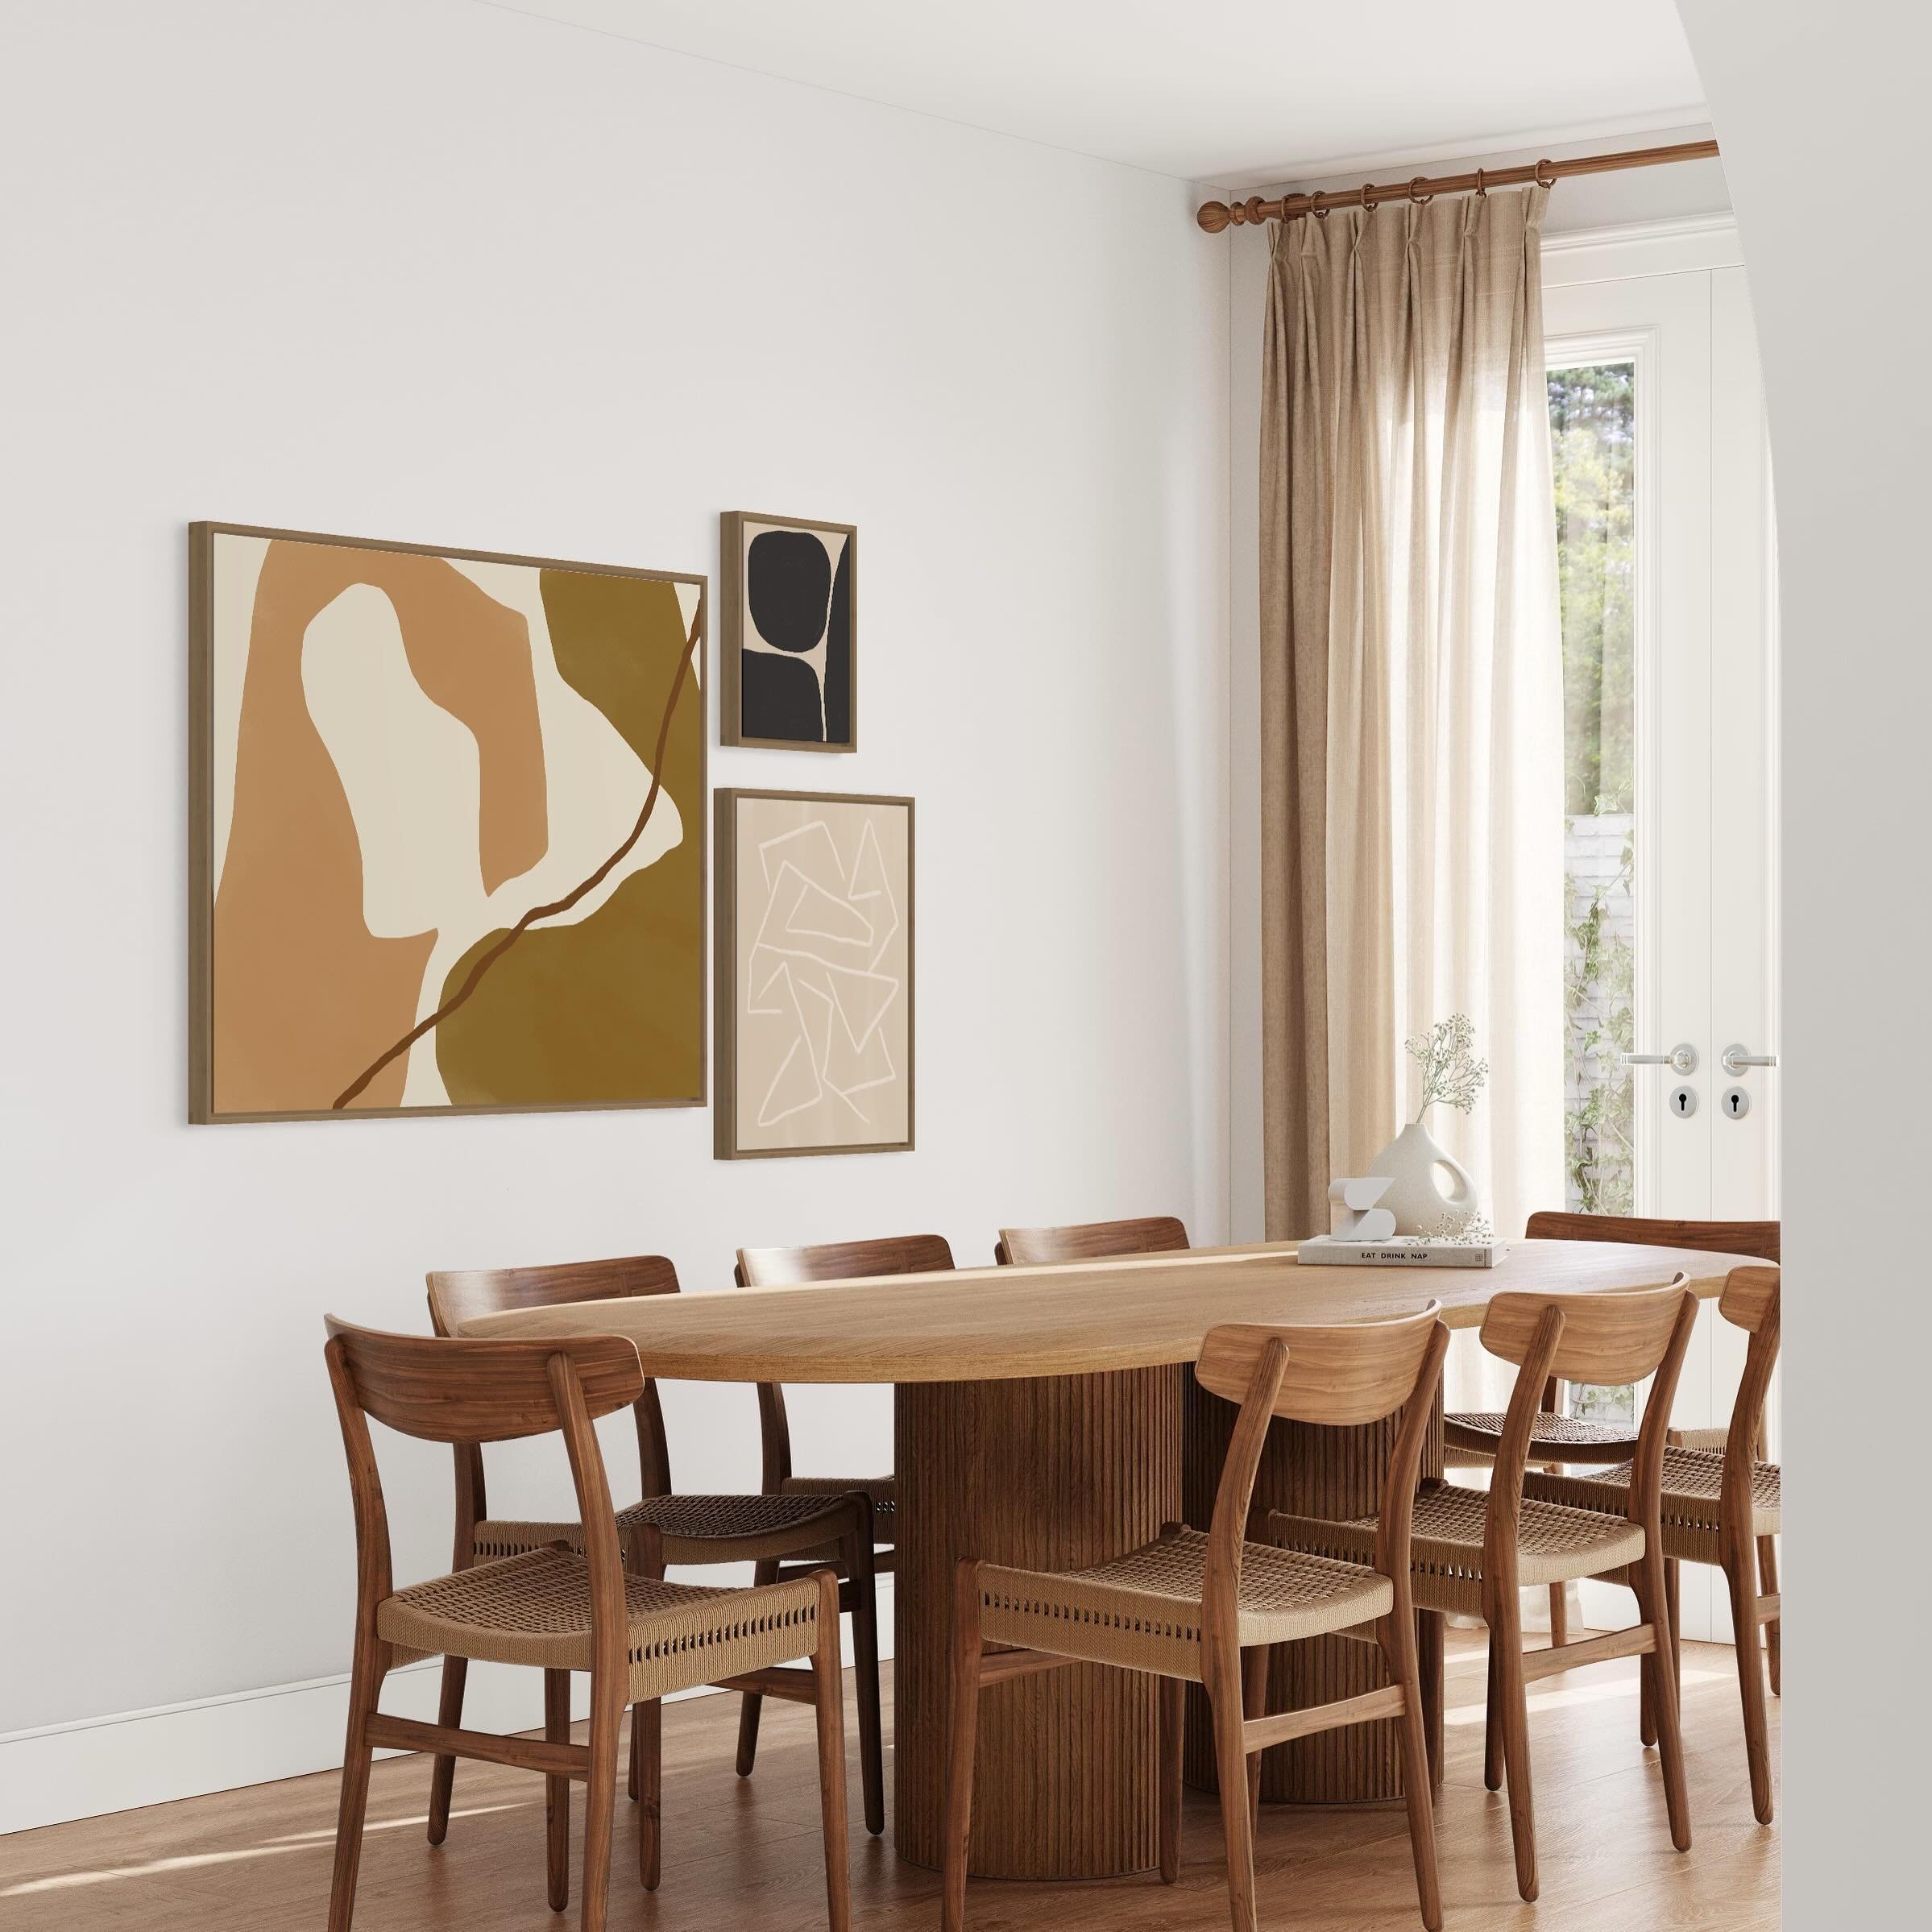 Very into a collage of STS prints in this sweet dining room thanks to @smartistapp ✨ As a small side business, it&rsquo;s so helpful to have easy ways to create content for your work!⁣
.⁣
.⁣
.⁣
.⁣
.⁣
.⁣
#artprints #modernart #abstractart #interiordes